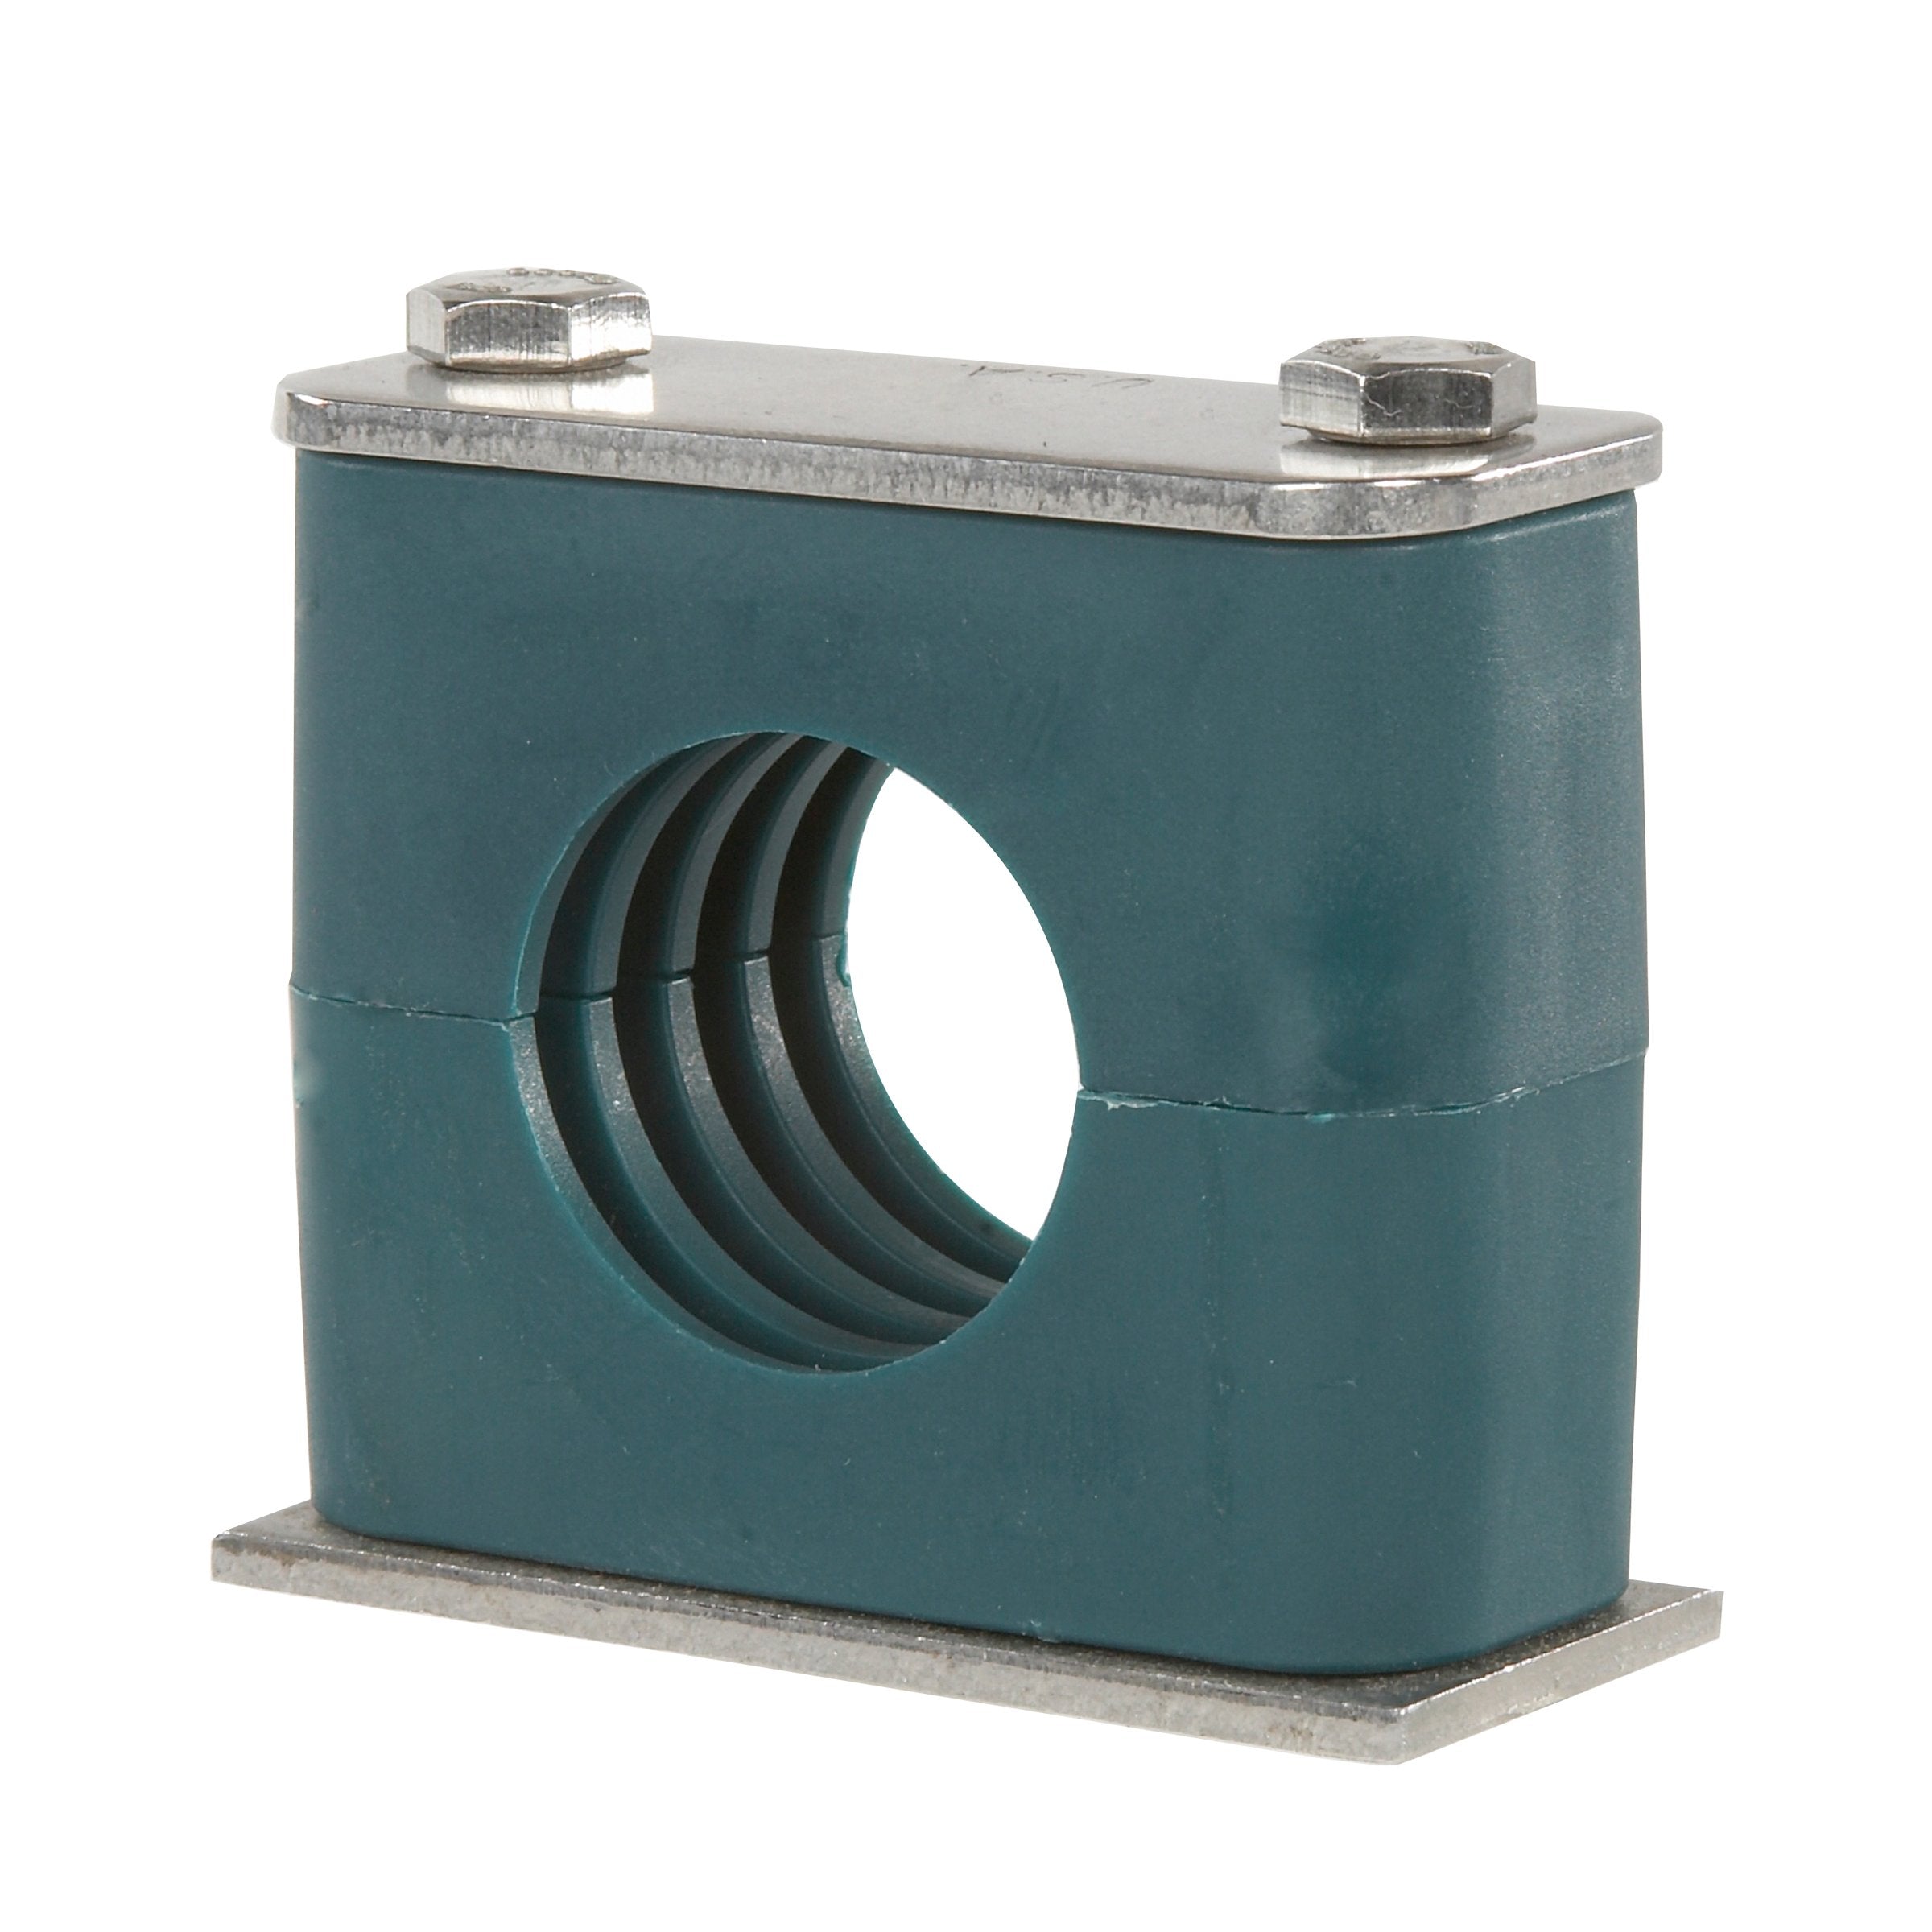 SP-322-PP-DP-AS-U-W5 : Stauff Clamp, Single Weld Plate, 0.875 inch (22mm) OD, for 7/8" Tube, Green PP Insert, Profiled Interior, 316SS